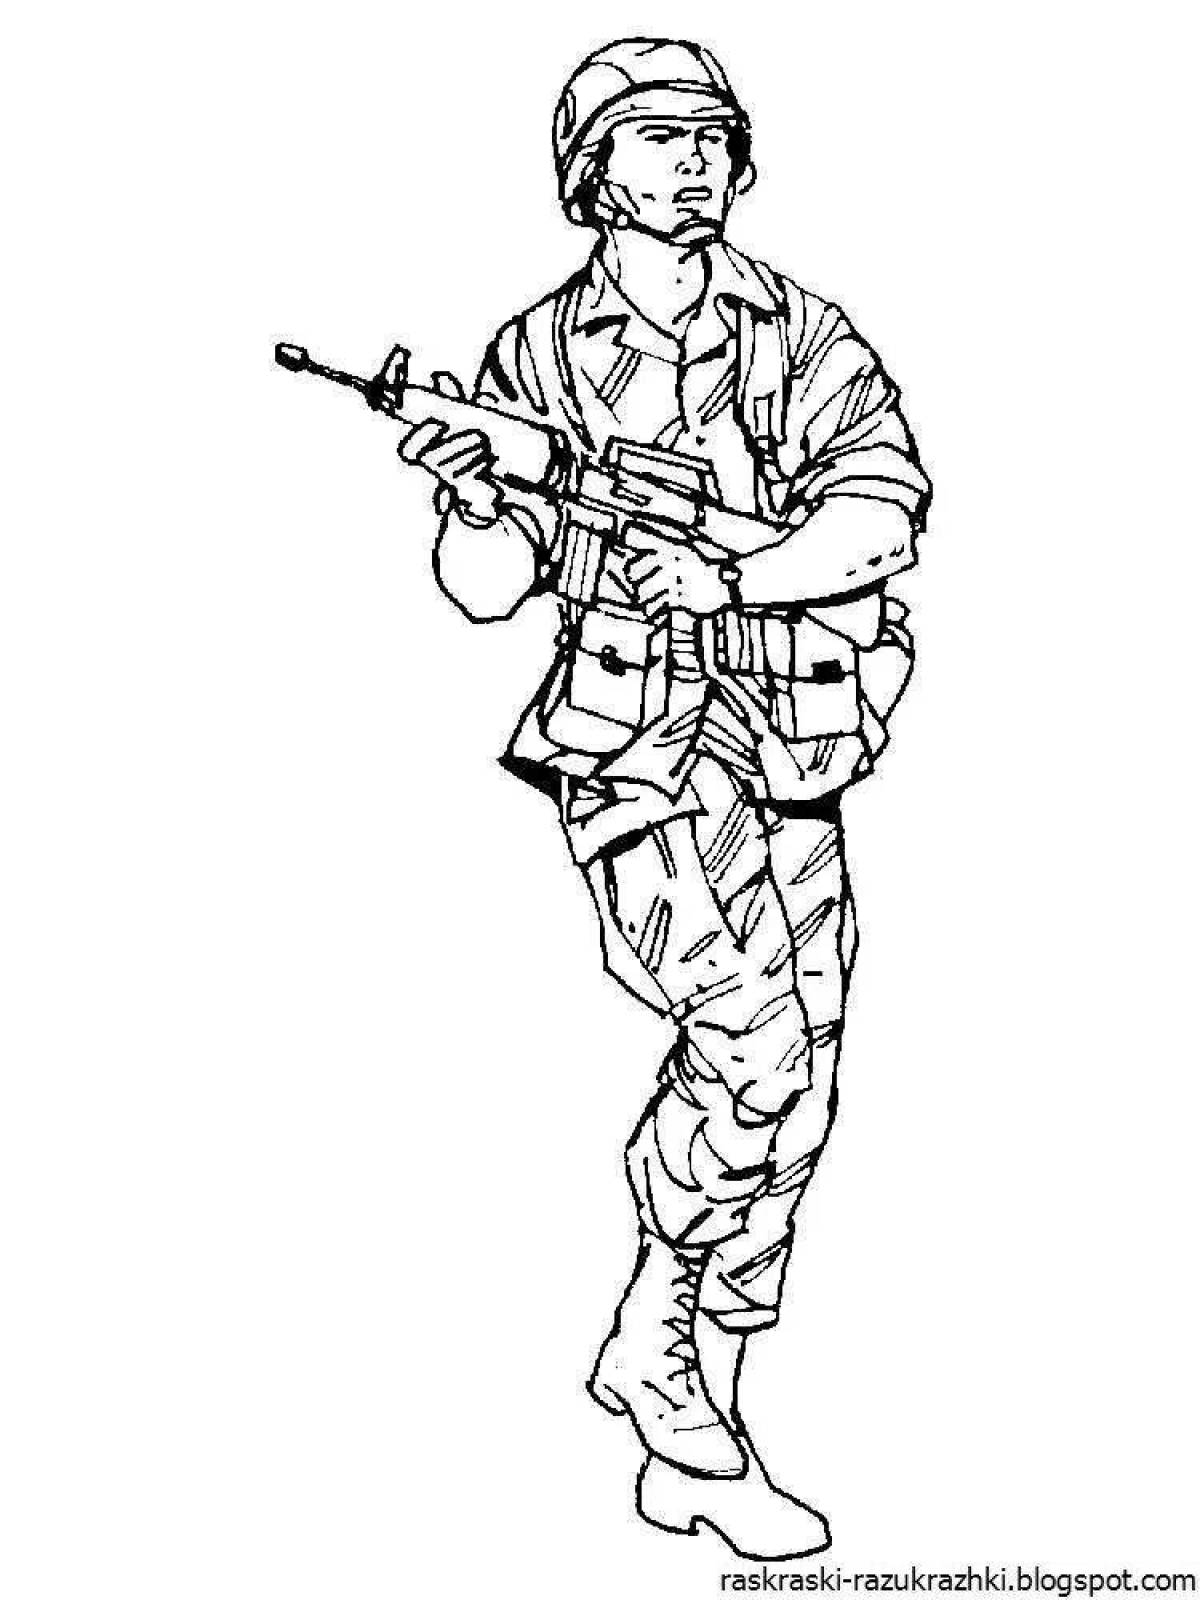 Majestic military drawing coloring page